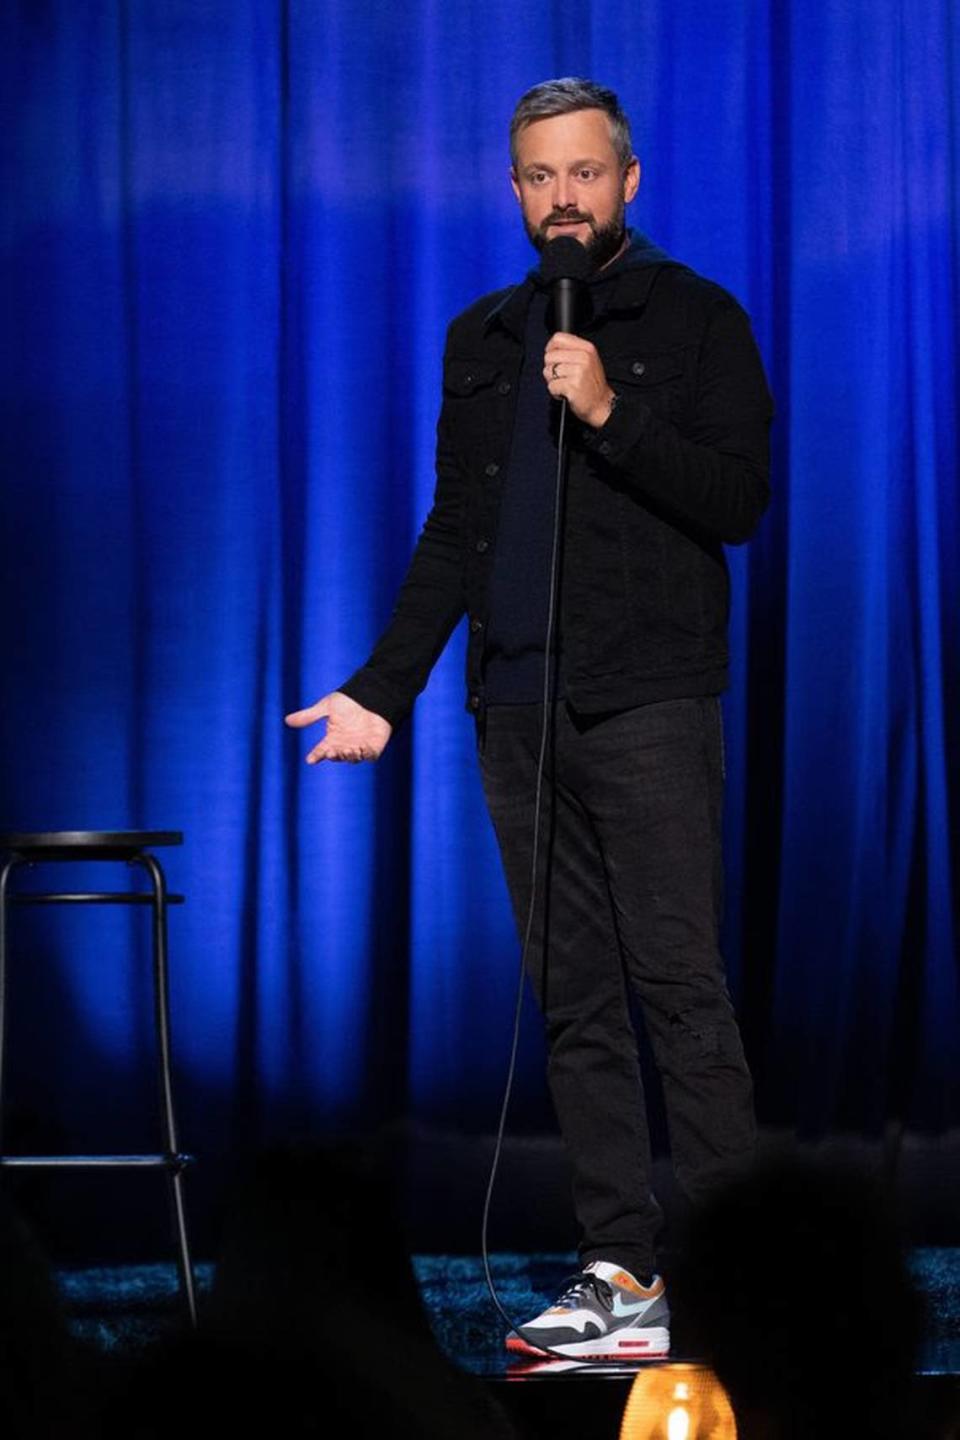 Nate Bargatze is a popular touring comedian with several Netflix stand-up specials. File photo